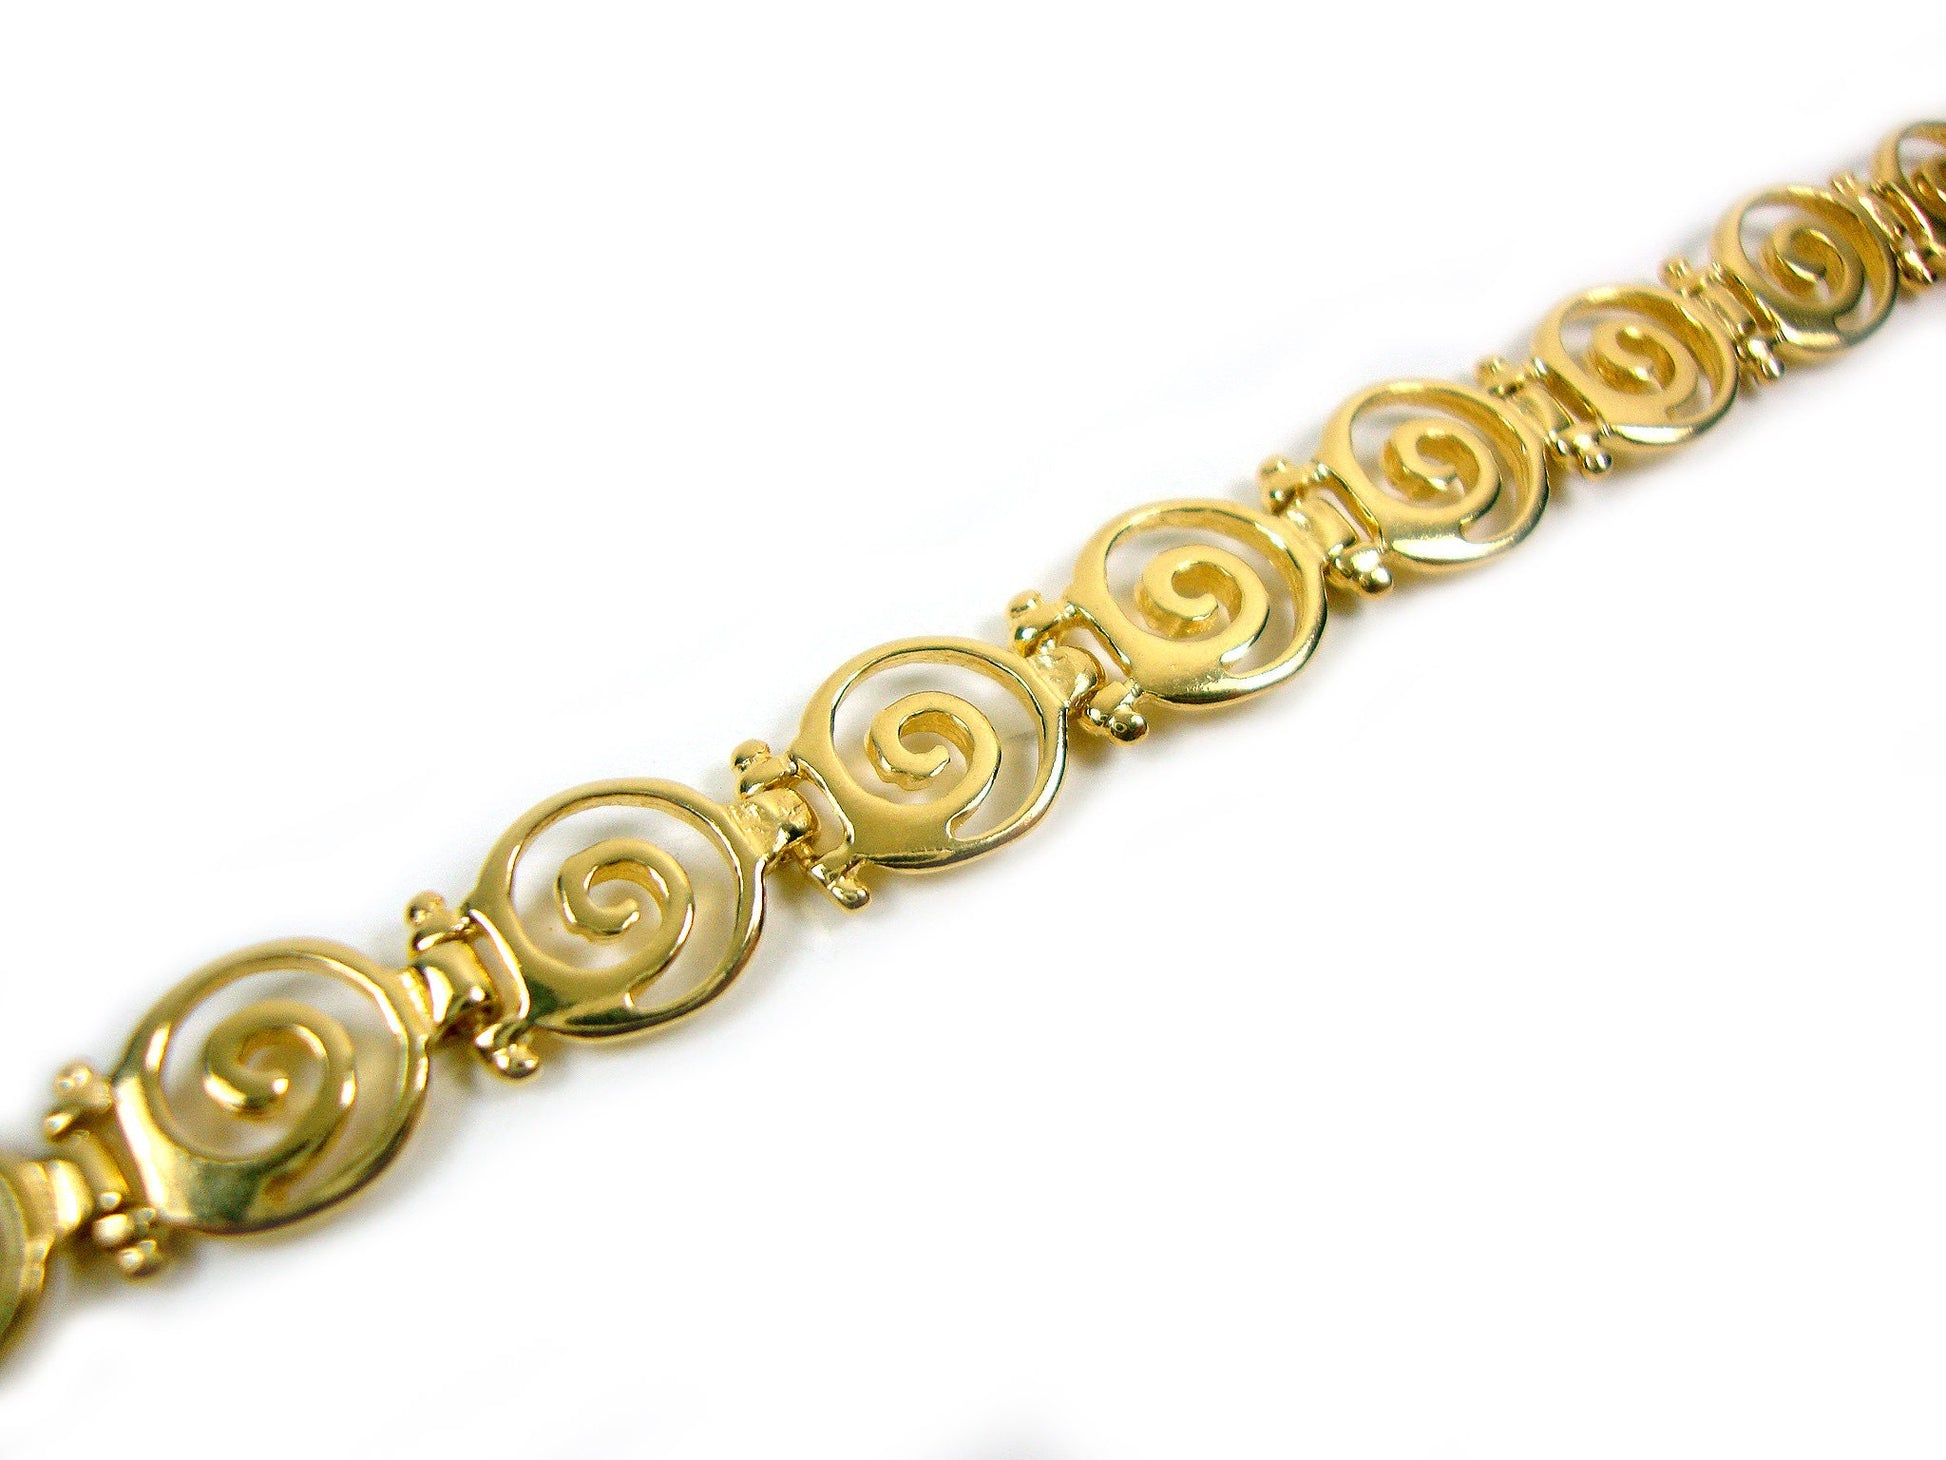 Sterling Silver and Gold Plated Bracelet featuring Ancient Greek Eternity Key Spiral Design - Width 8 mm - Made in Greece